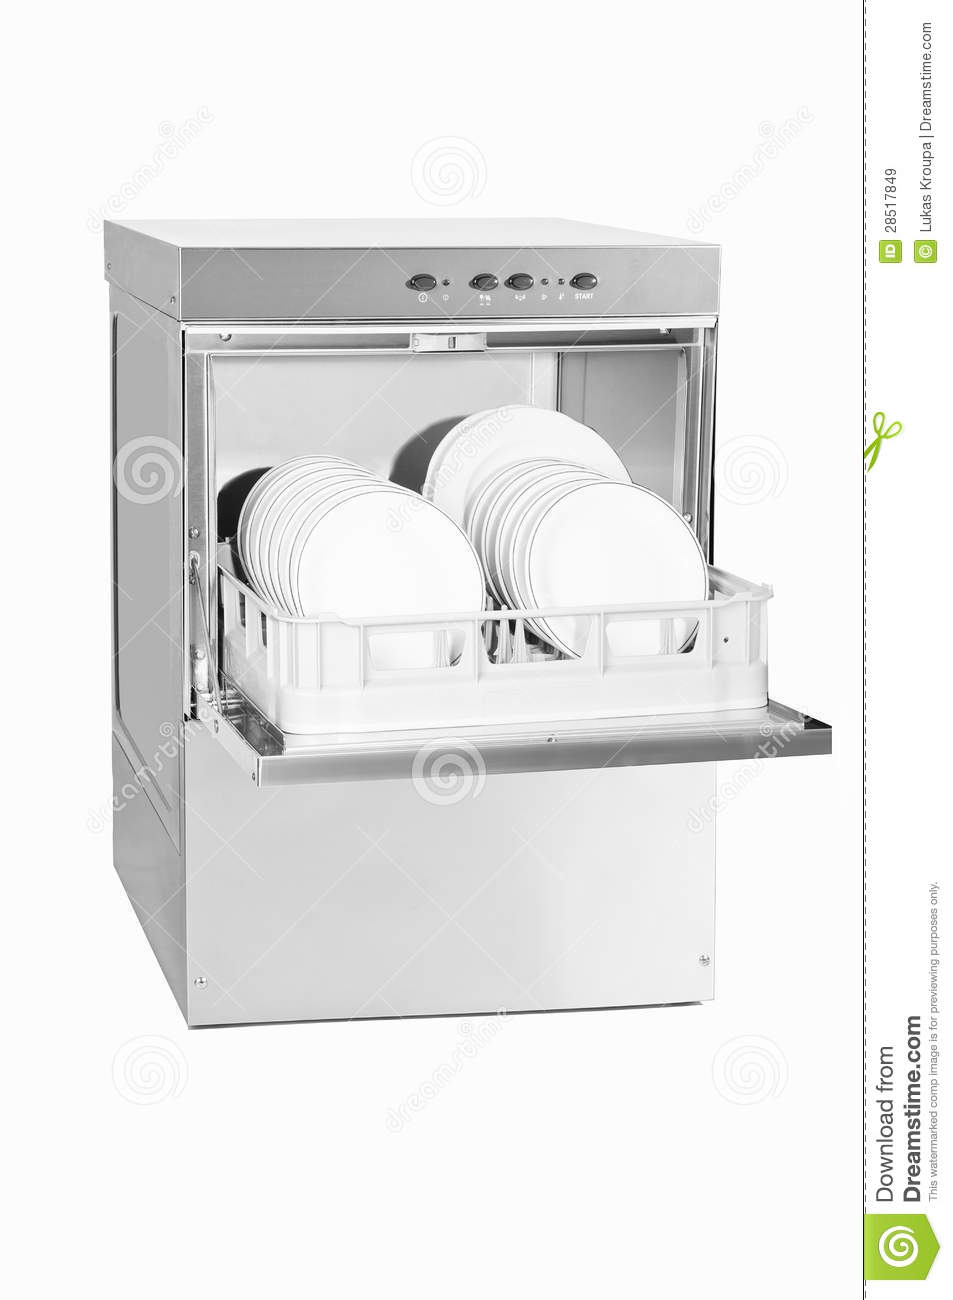 Dishwasher With Opened Door On White Background With Plates